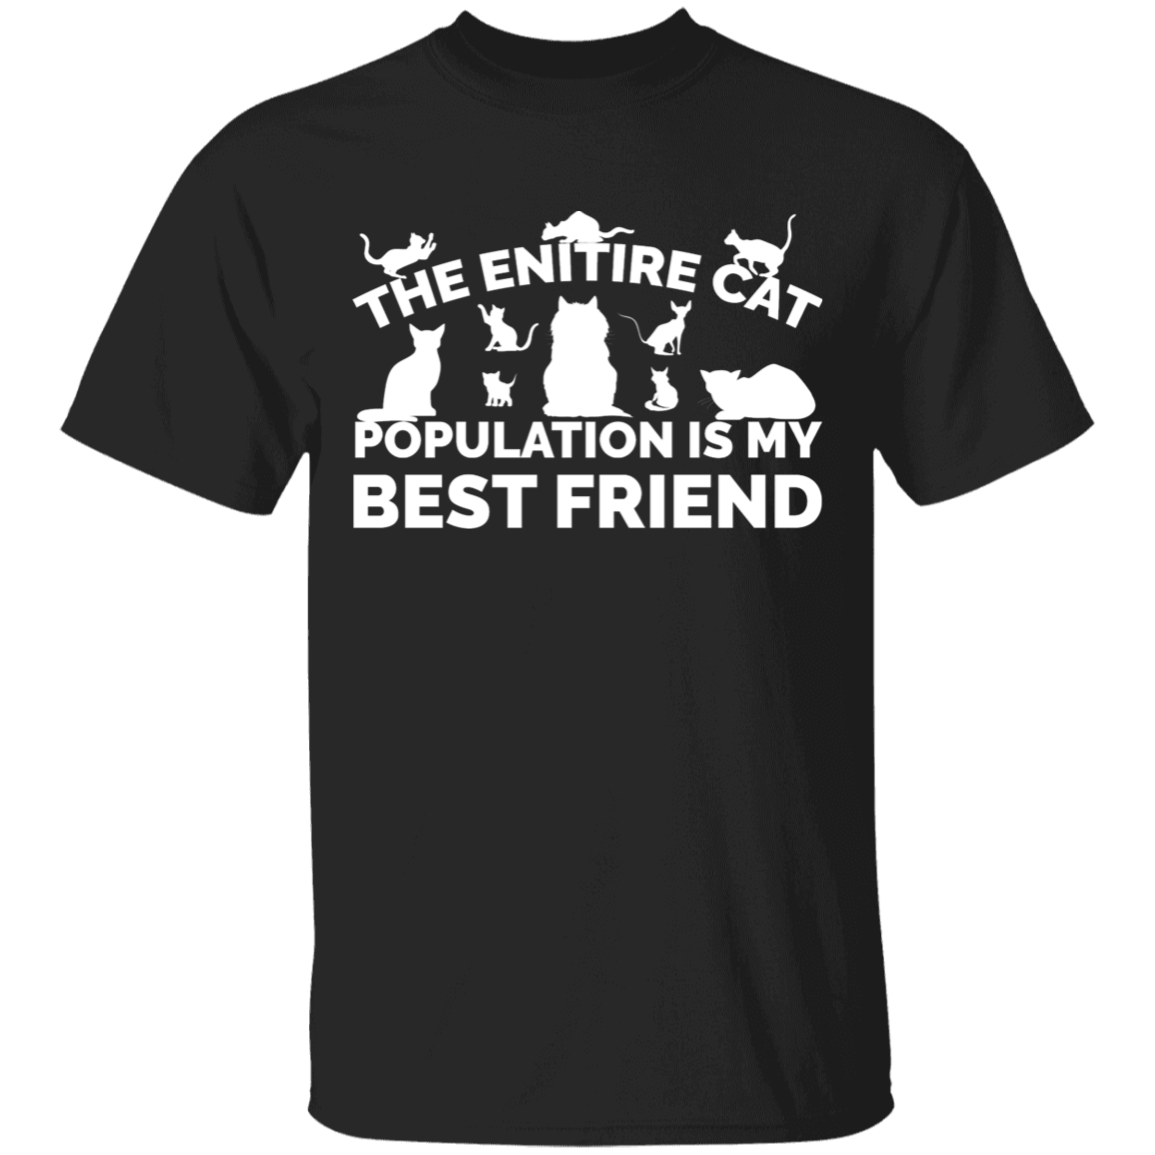 The Entire Cat Population - T Shirt.